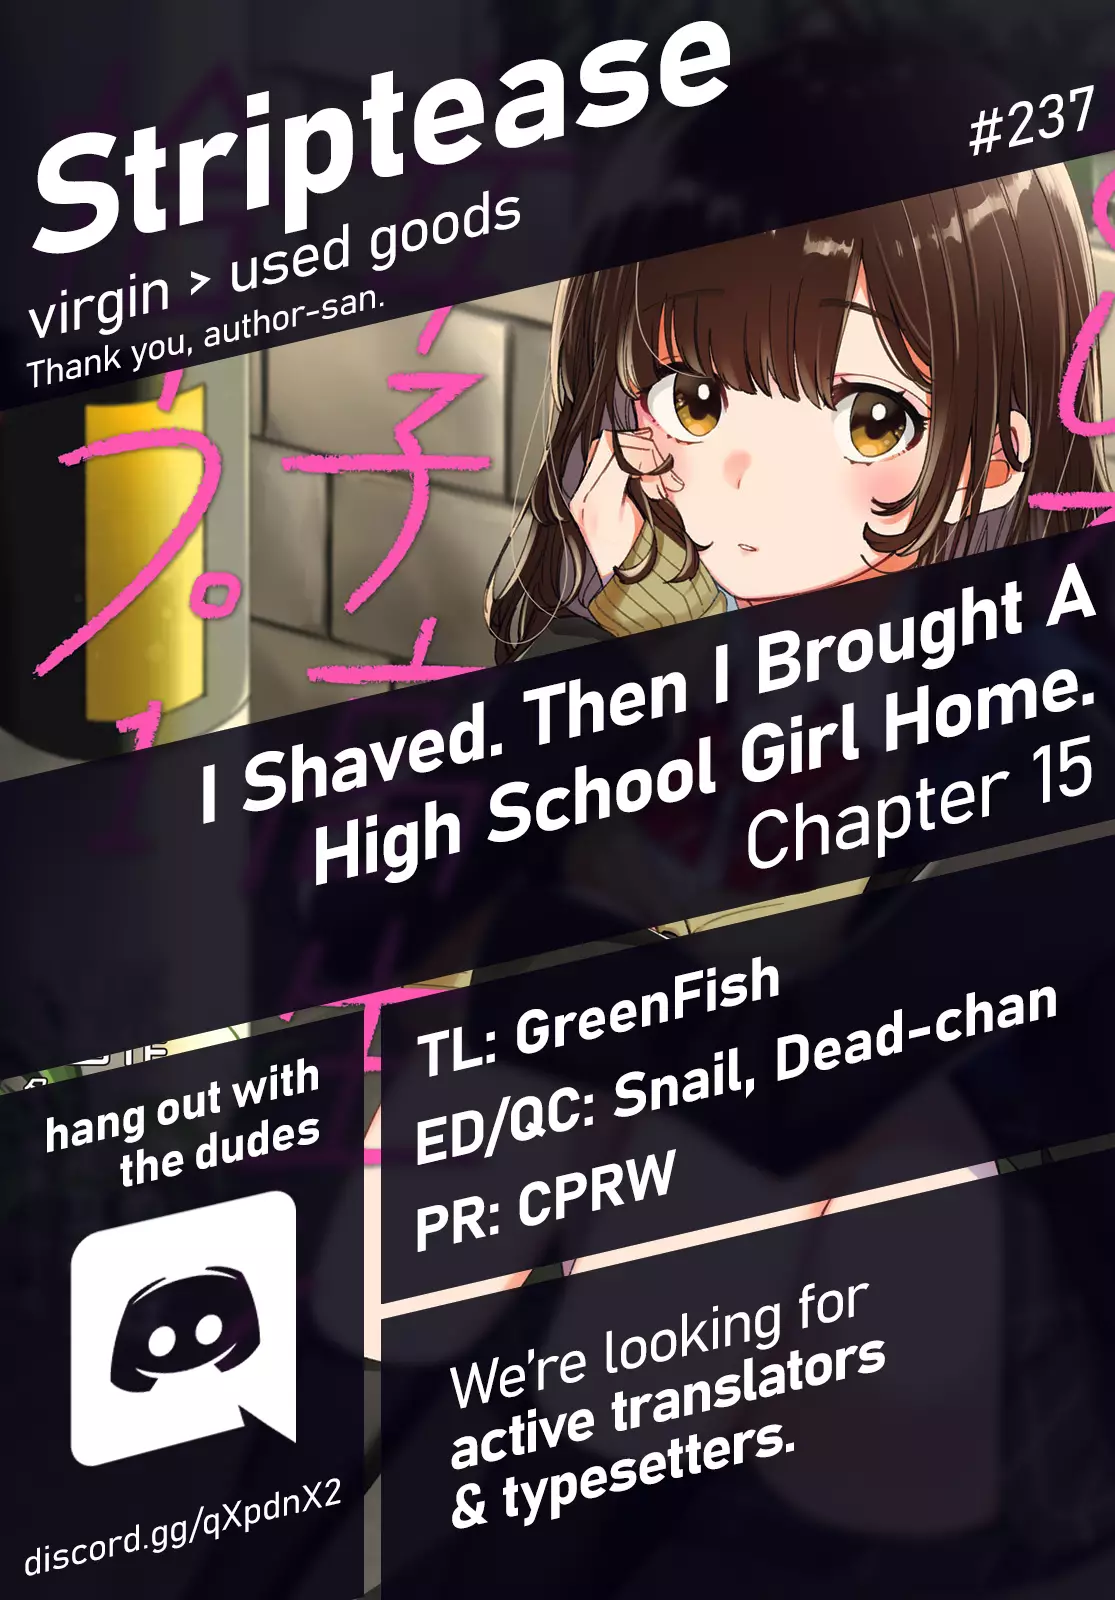 I Shaved. Then I Brought a High School Girl Home. - 15 page 1